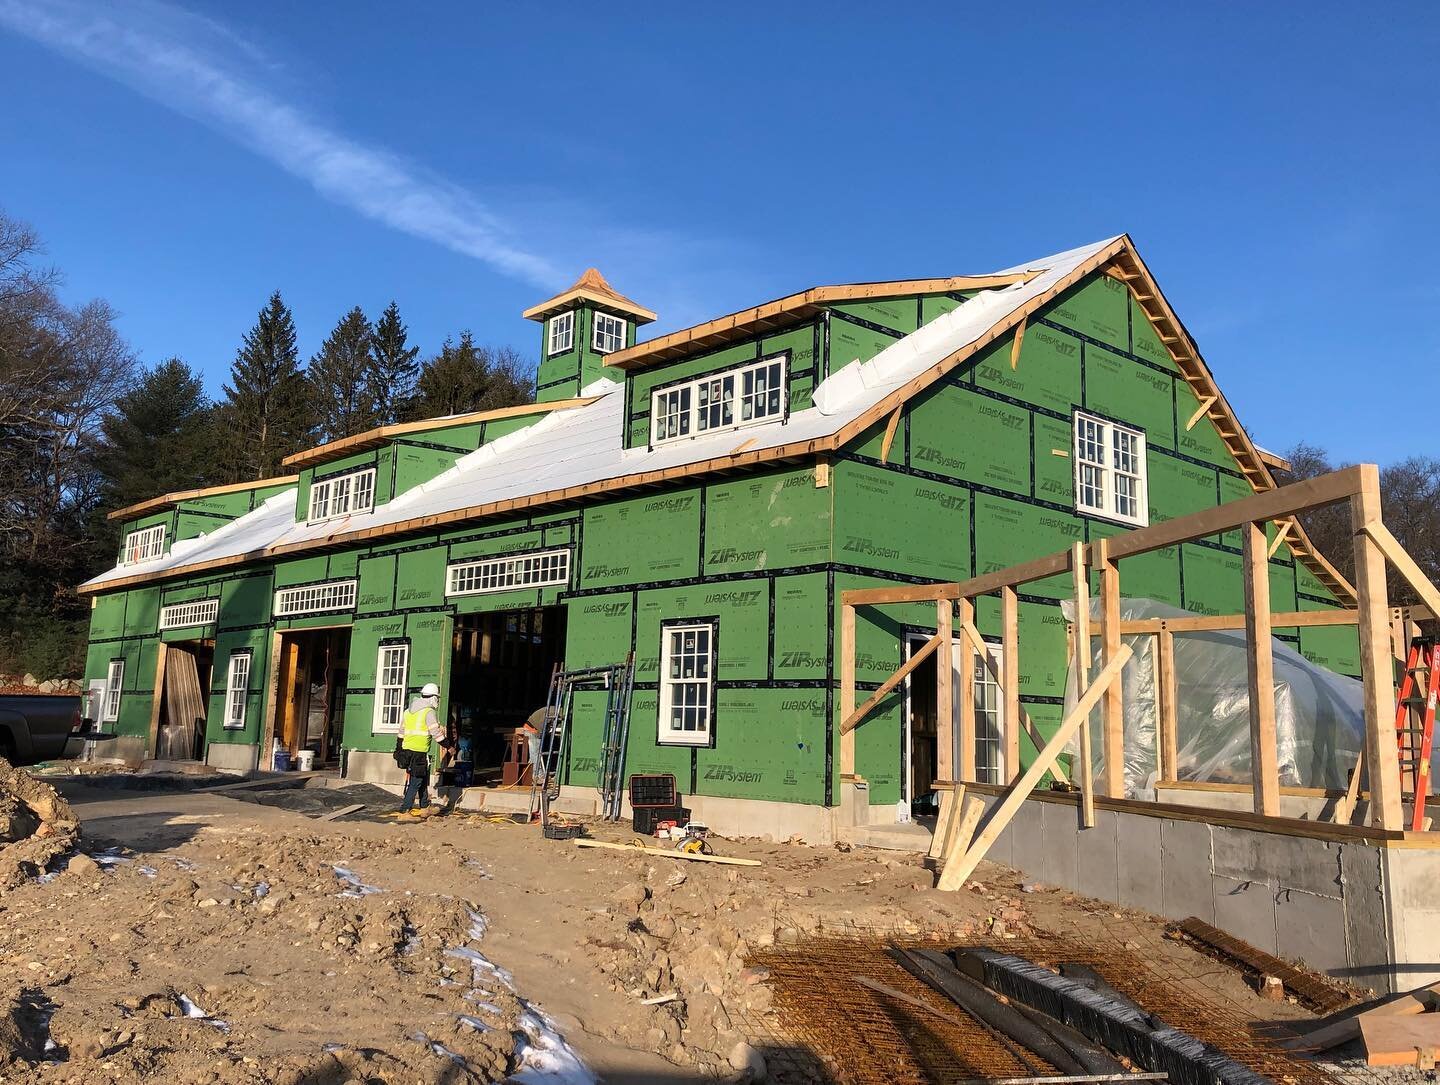 The recent cold and gloomy winter weather has not stopped progress on one of our barn projects. Strategic coordination of grid lines, ceiling heights, and materials not only creates a narrative between the garage and entertainment areas internally, b